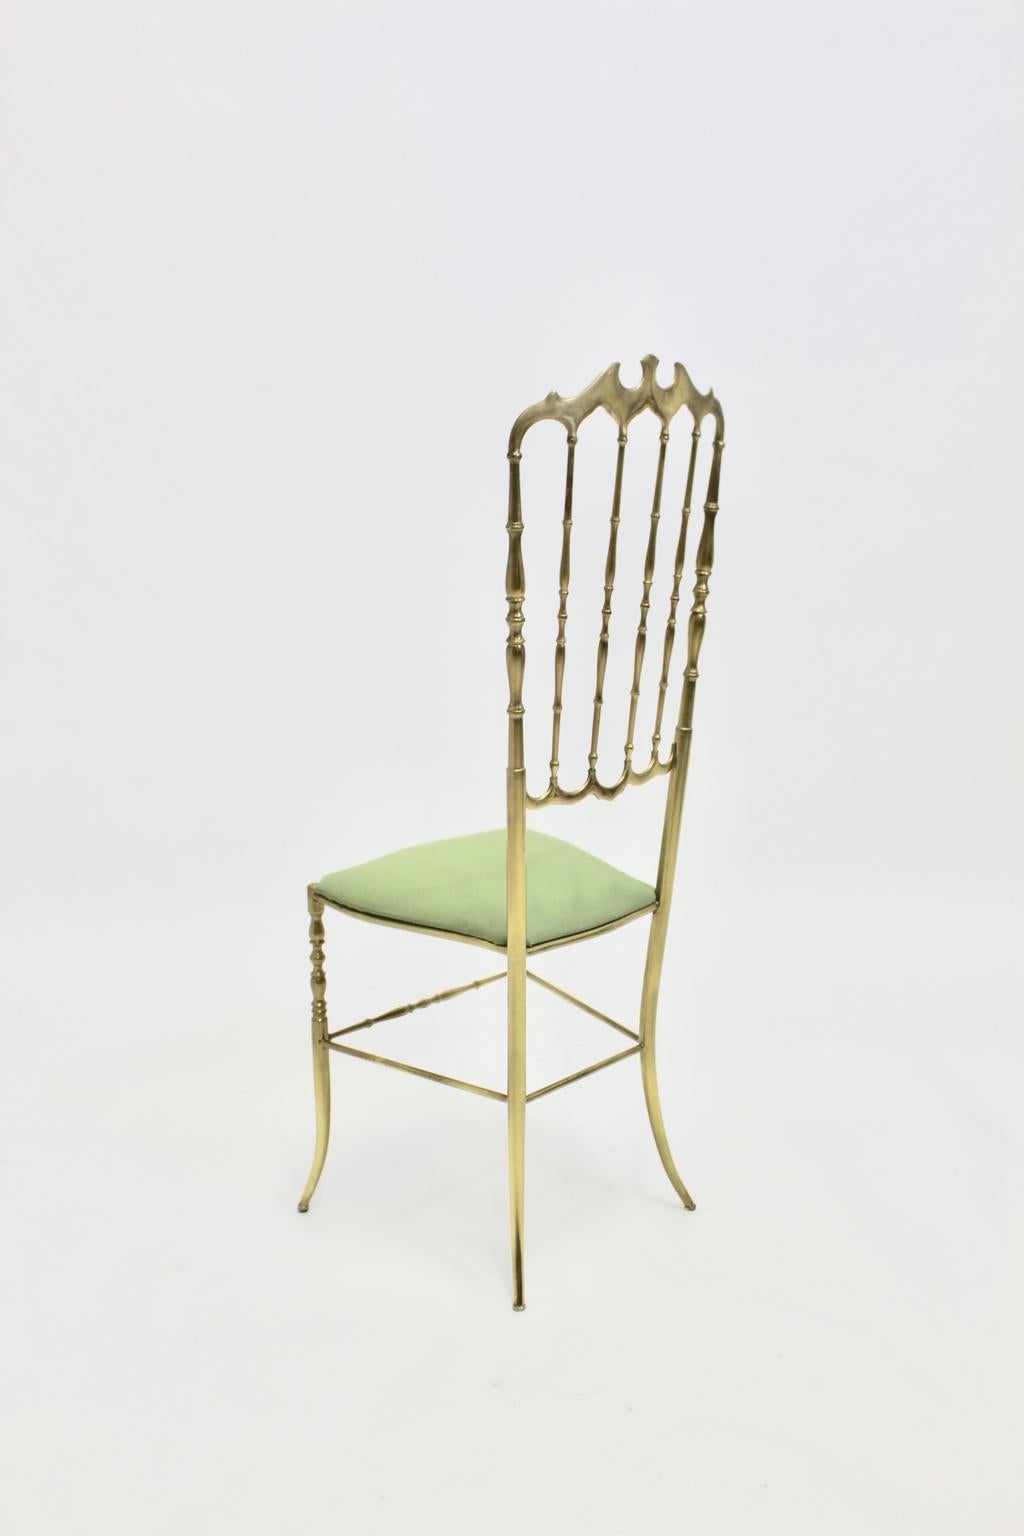 20th Century Mid-Century Modern Brass Vintage Chiavari Side Chair, 1950s, Italy For Sale